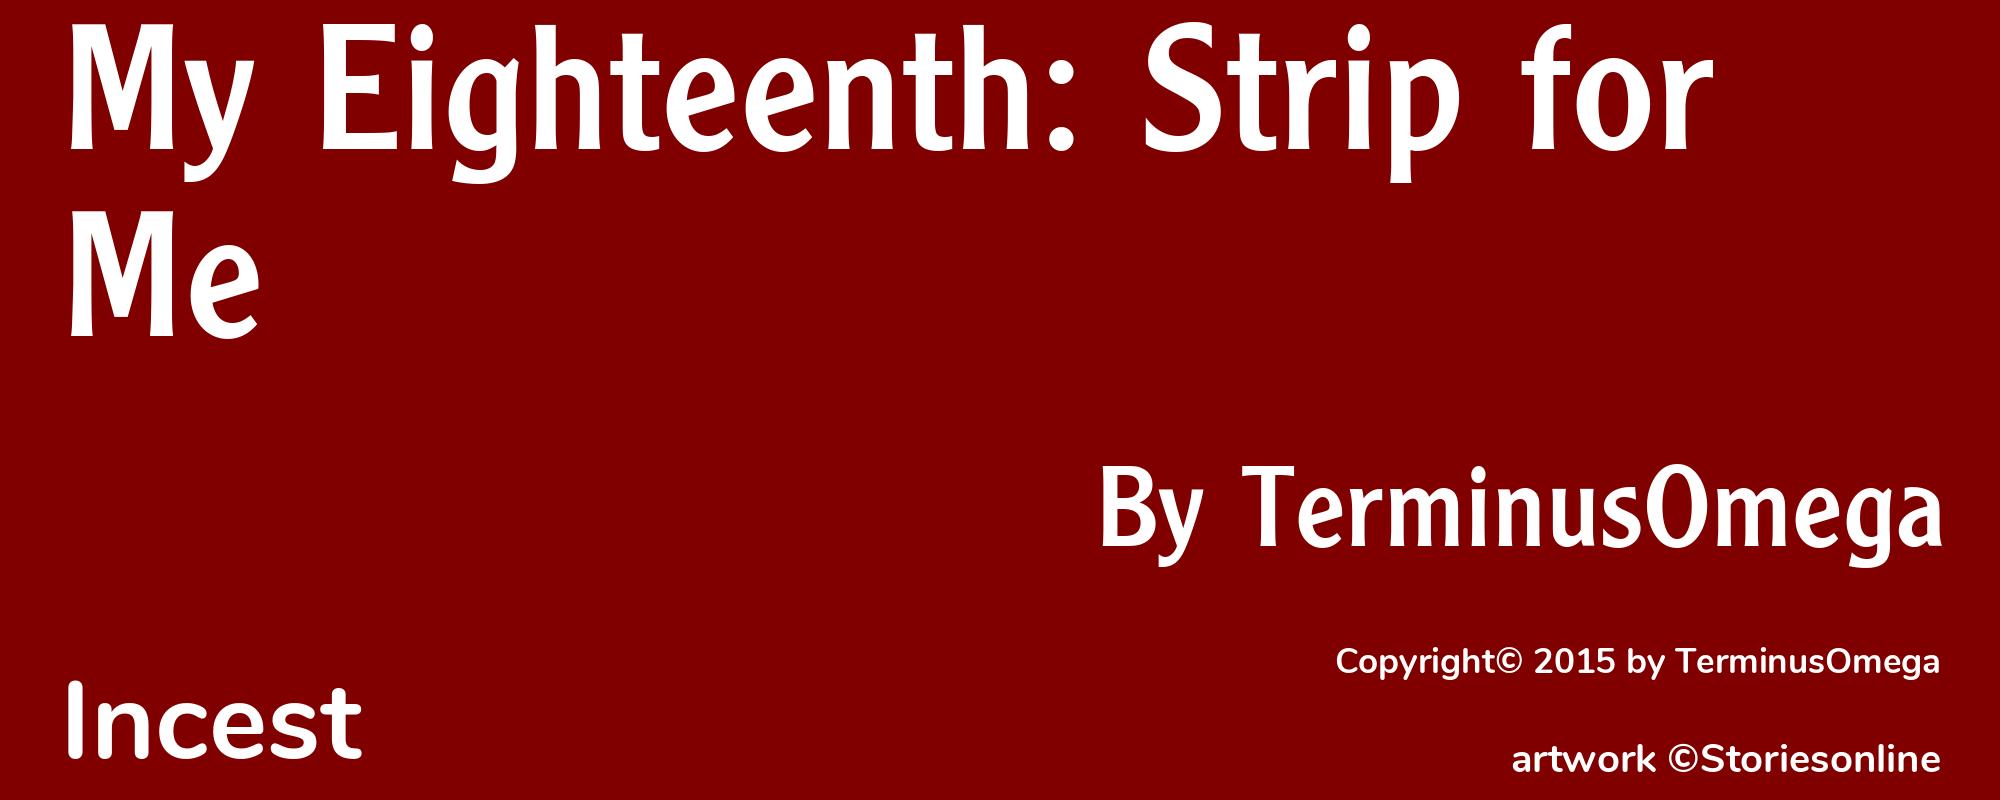 My Eighteenth: Strip for Me - Cover